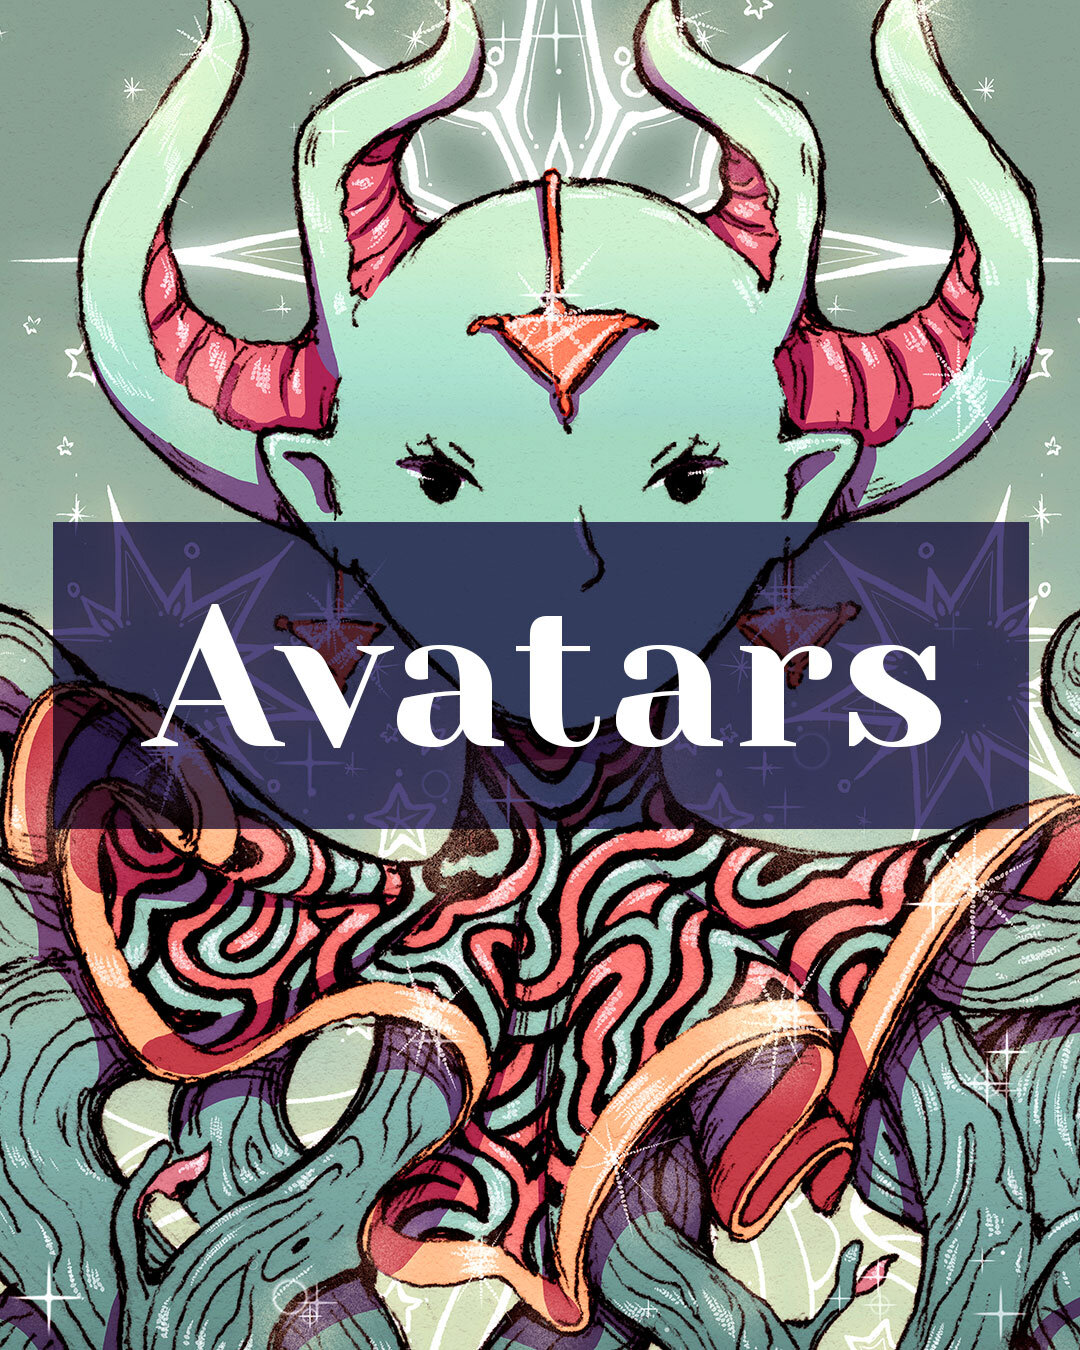 NFT Avatars and Collectibles on OpenSea